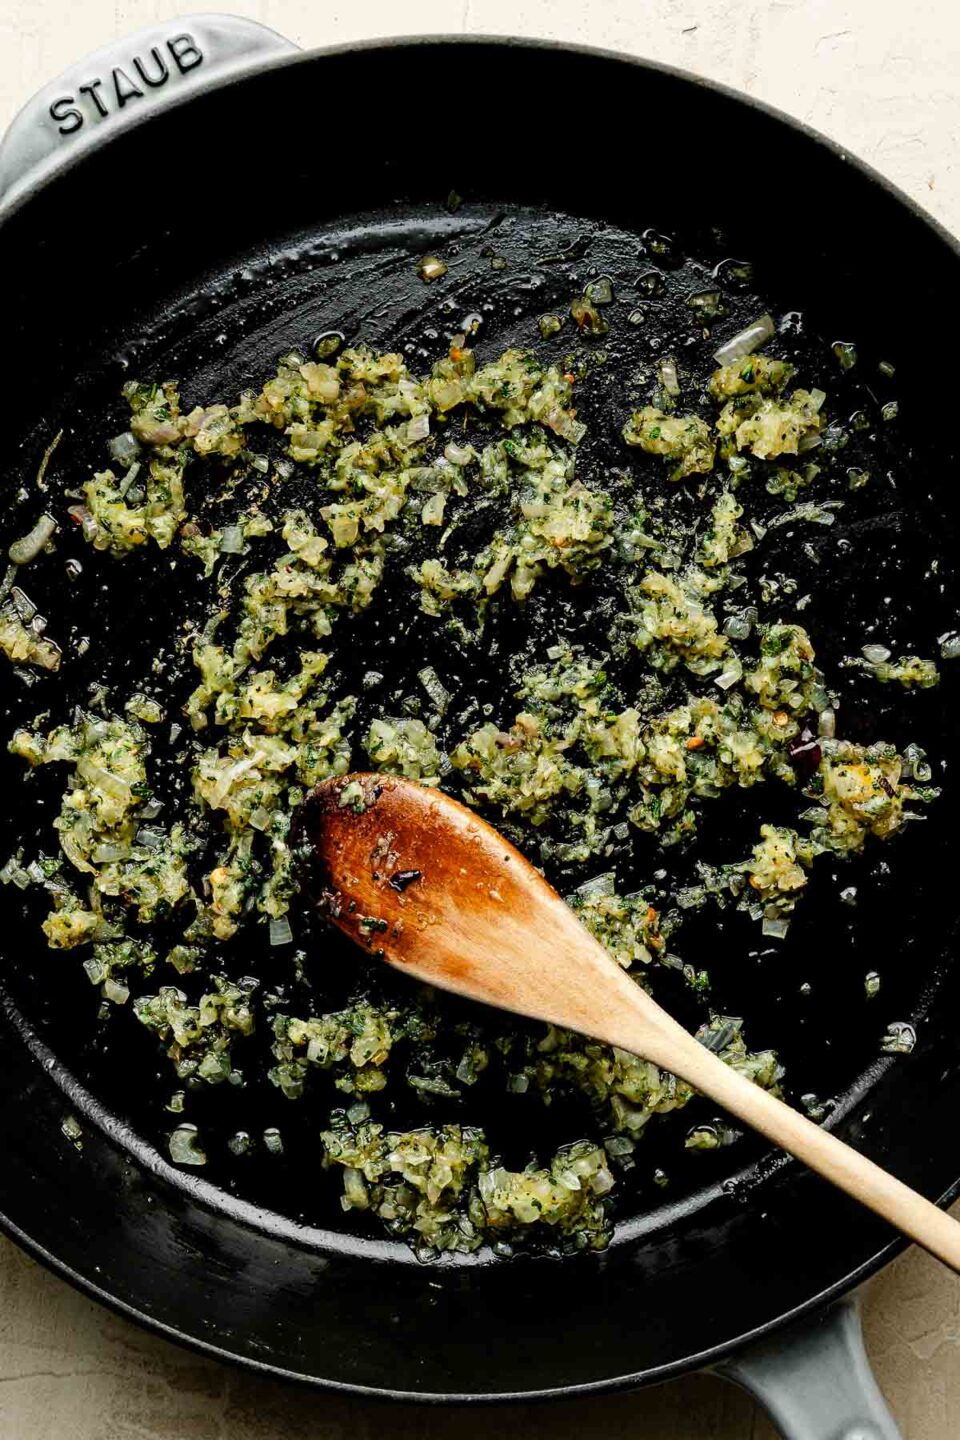 An overhead shot of sage and garlic being sauteed in a black cast-iron skillet atop an off-white surface.